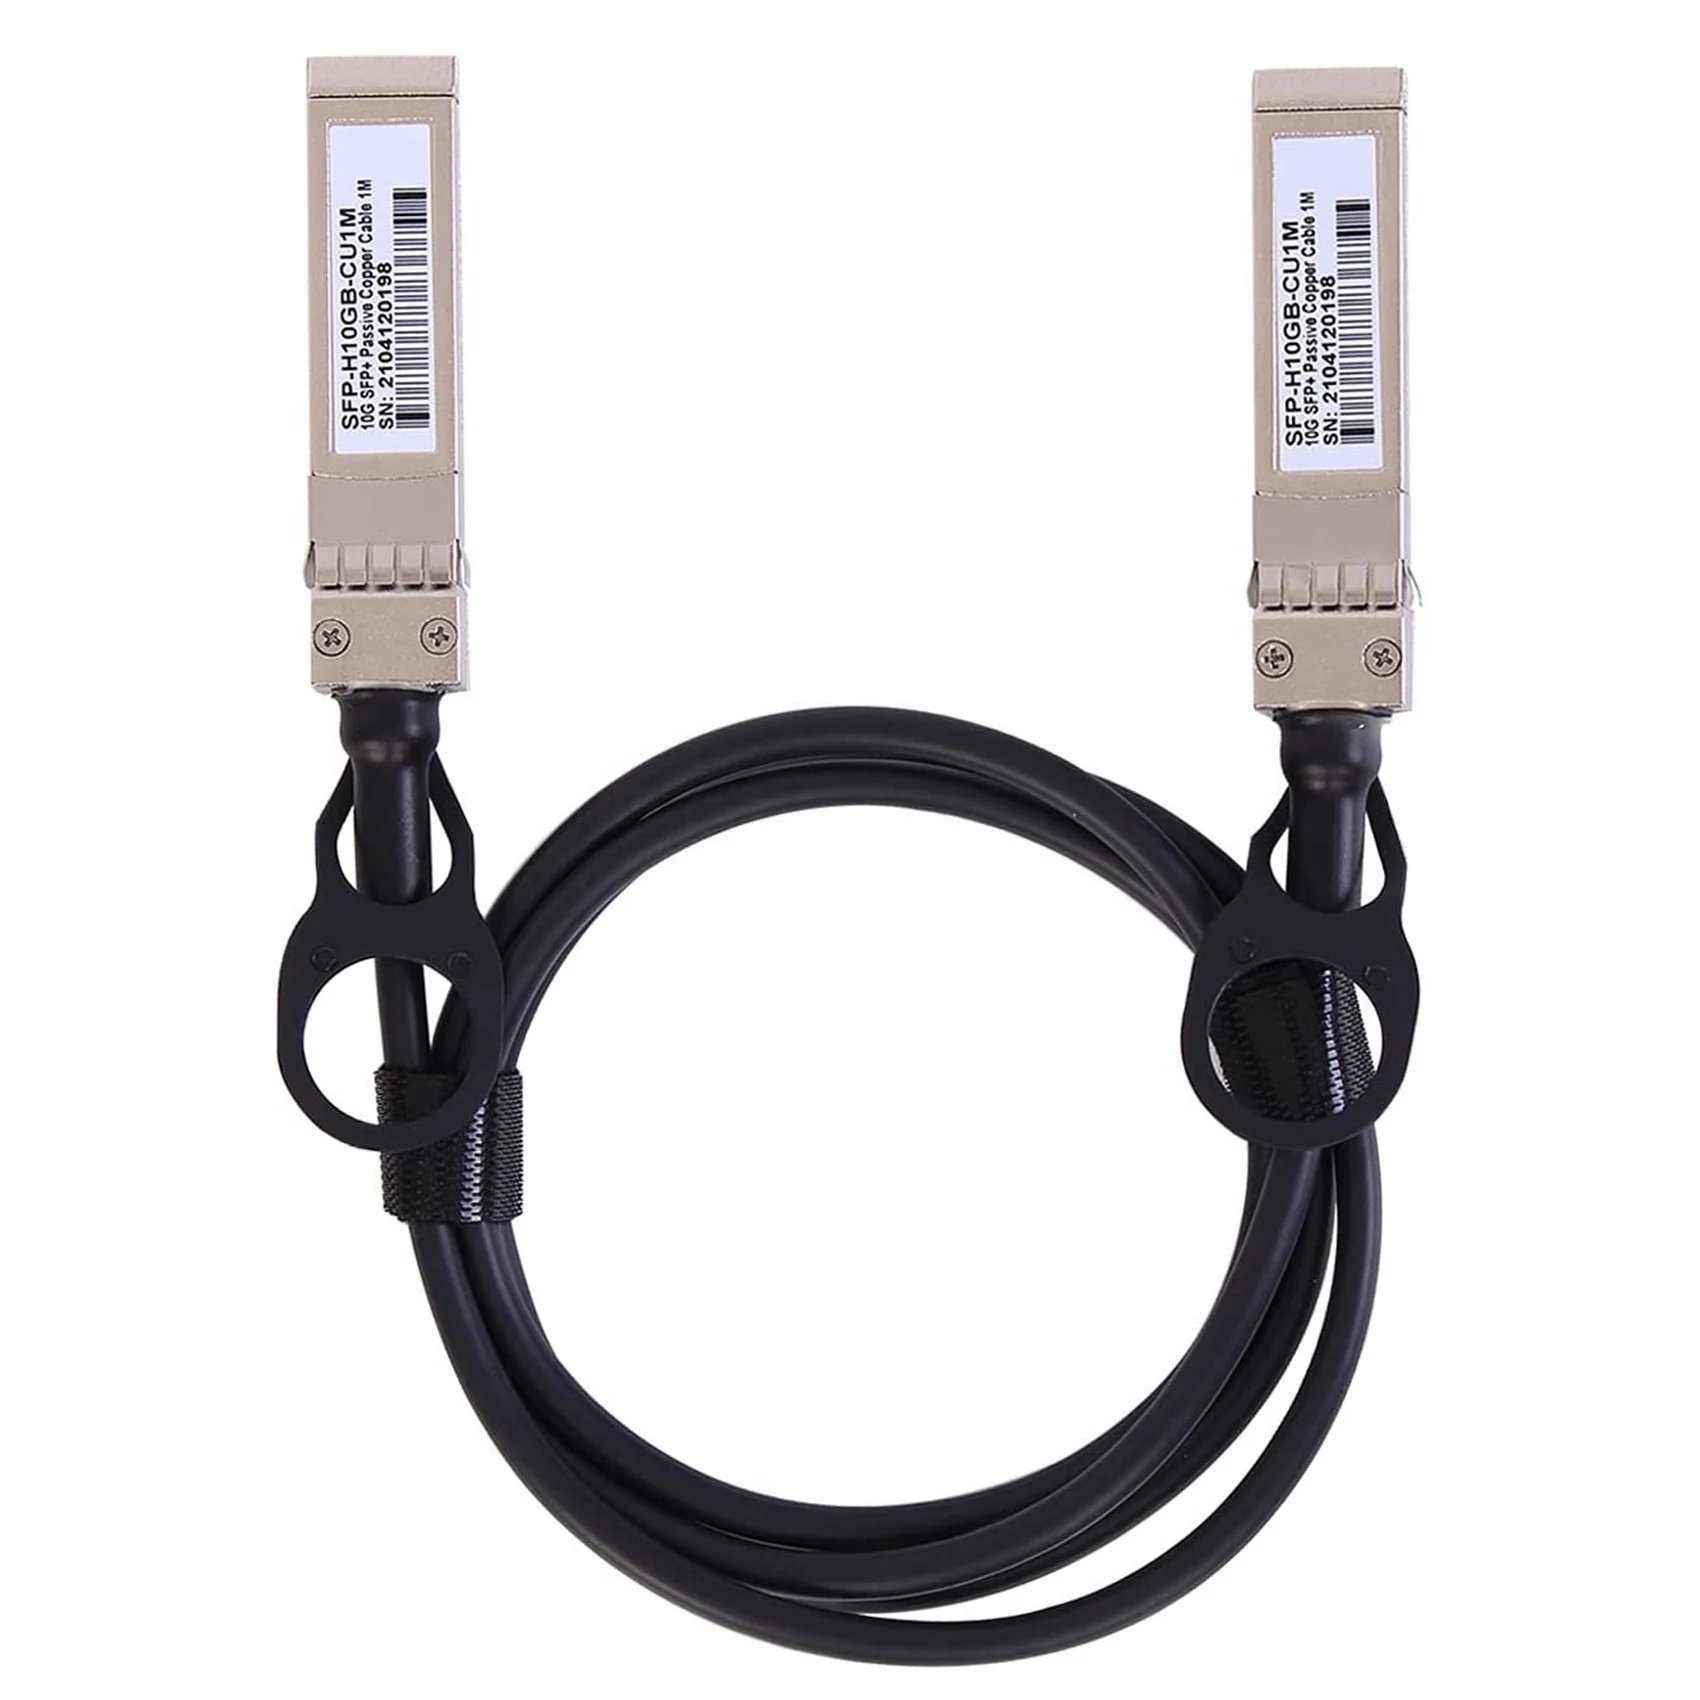 

10G SFP+ Twinax Cable, Direct Attach Copper(DAC) 10GBASE SFP Passive Cable for SFP-H10GB-CU1M,Ubiquiti,D-Link(1M)